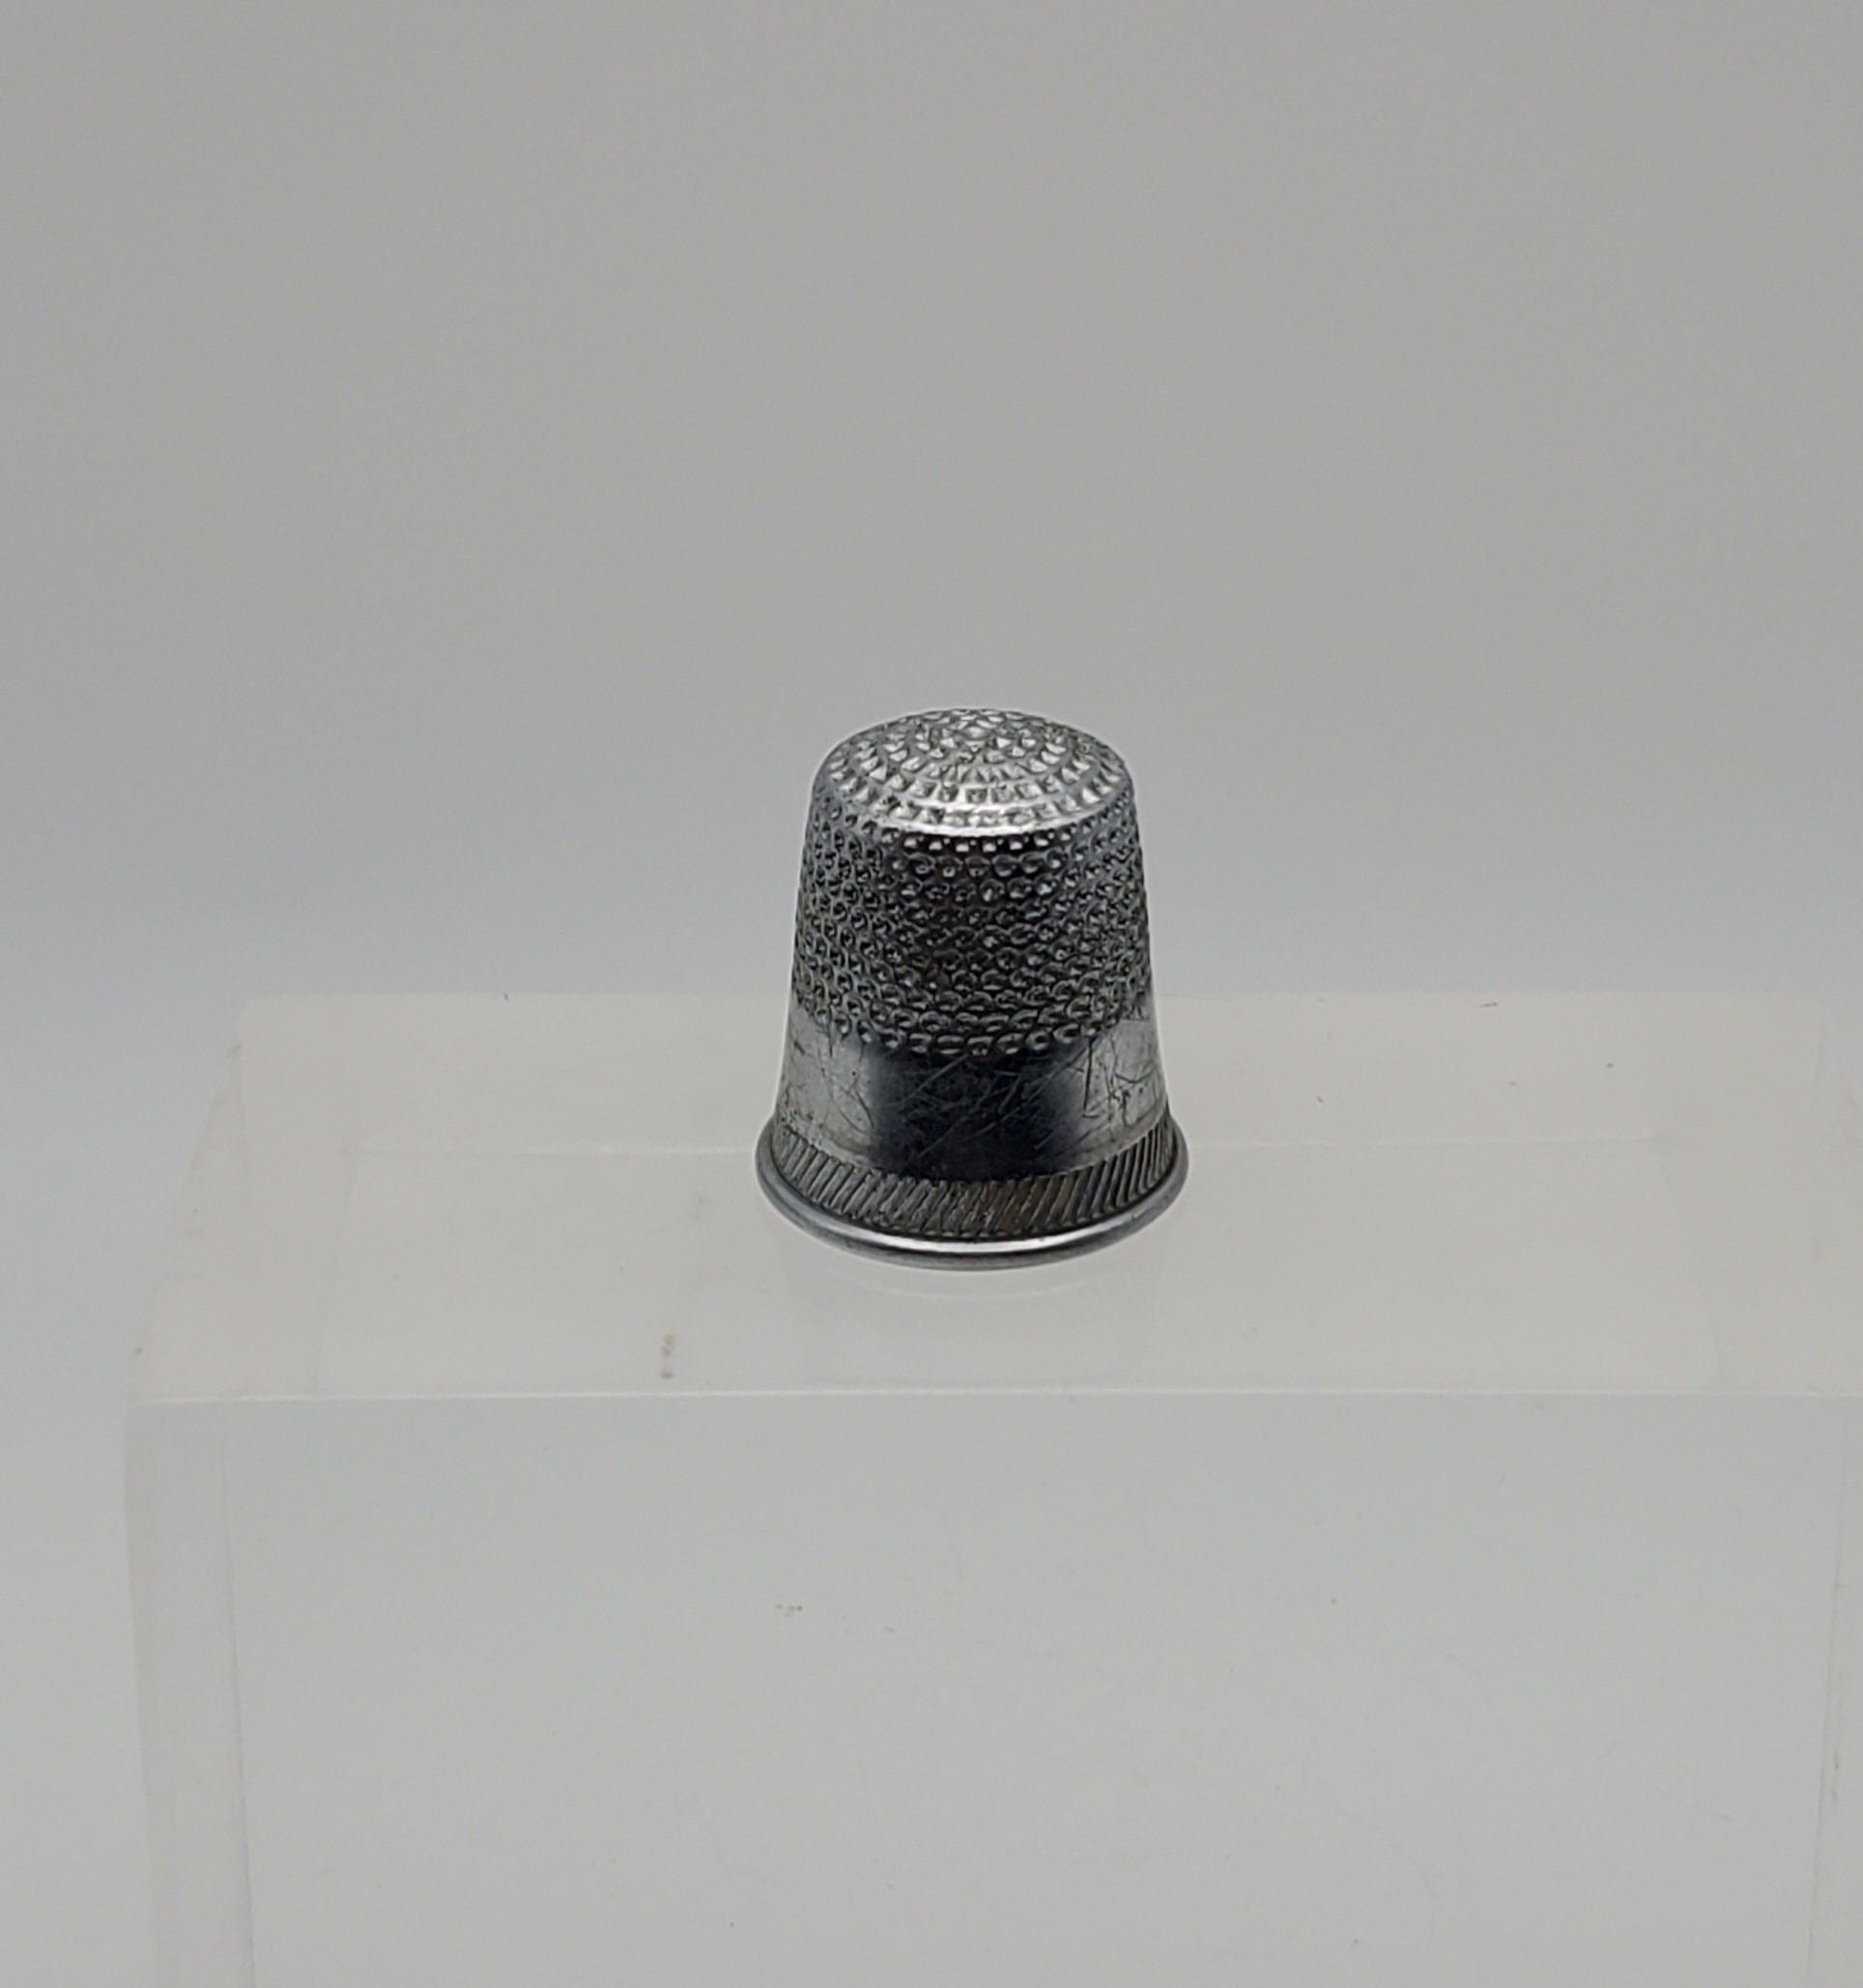 Silicon Thimble with Steel Top Size Medium - 3073640917325